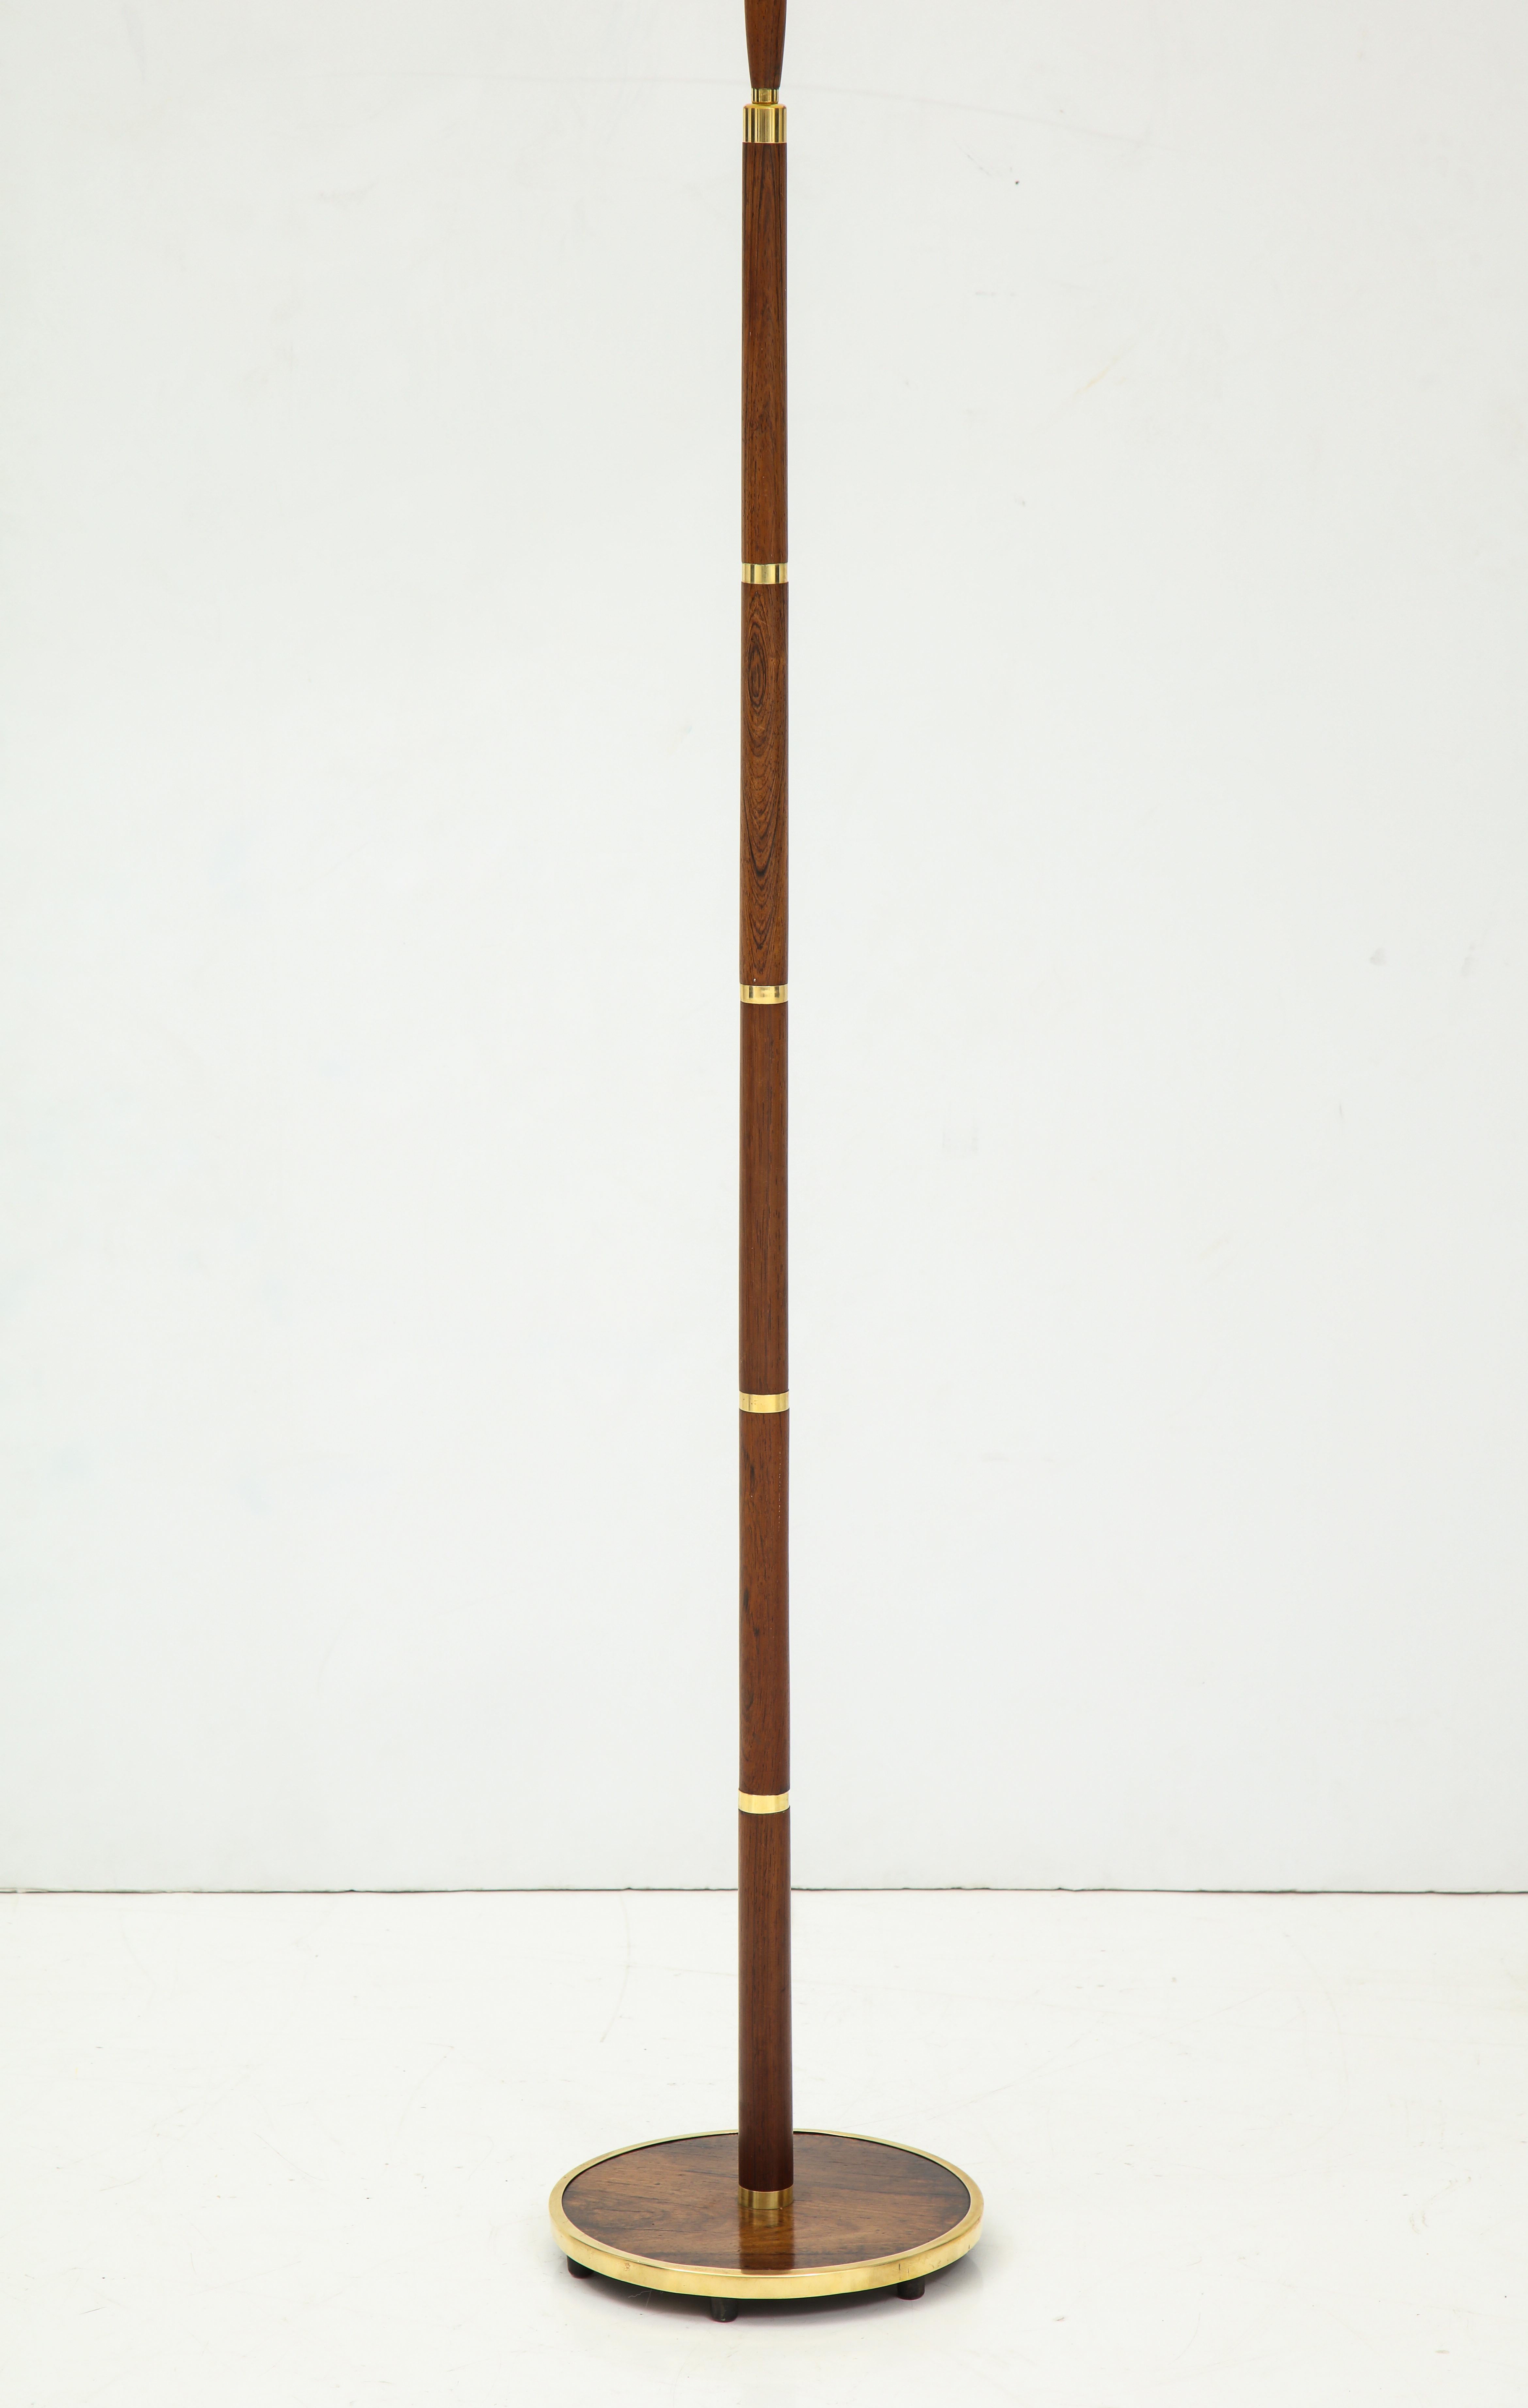 A Danish Fog & Mørup brass and brass floor lamp, circa 1960, a more unusual model with well figured rosewood and a rosewood base. Also with a rosewood handle to extend the lamp higher. Re-wired for the US. Good color.